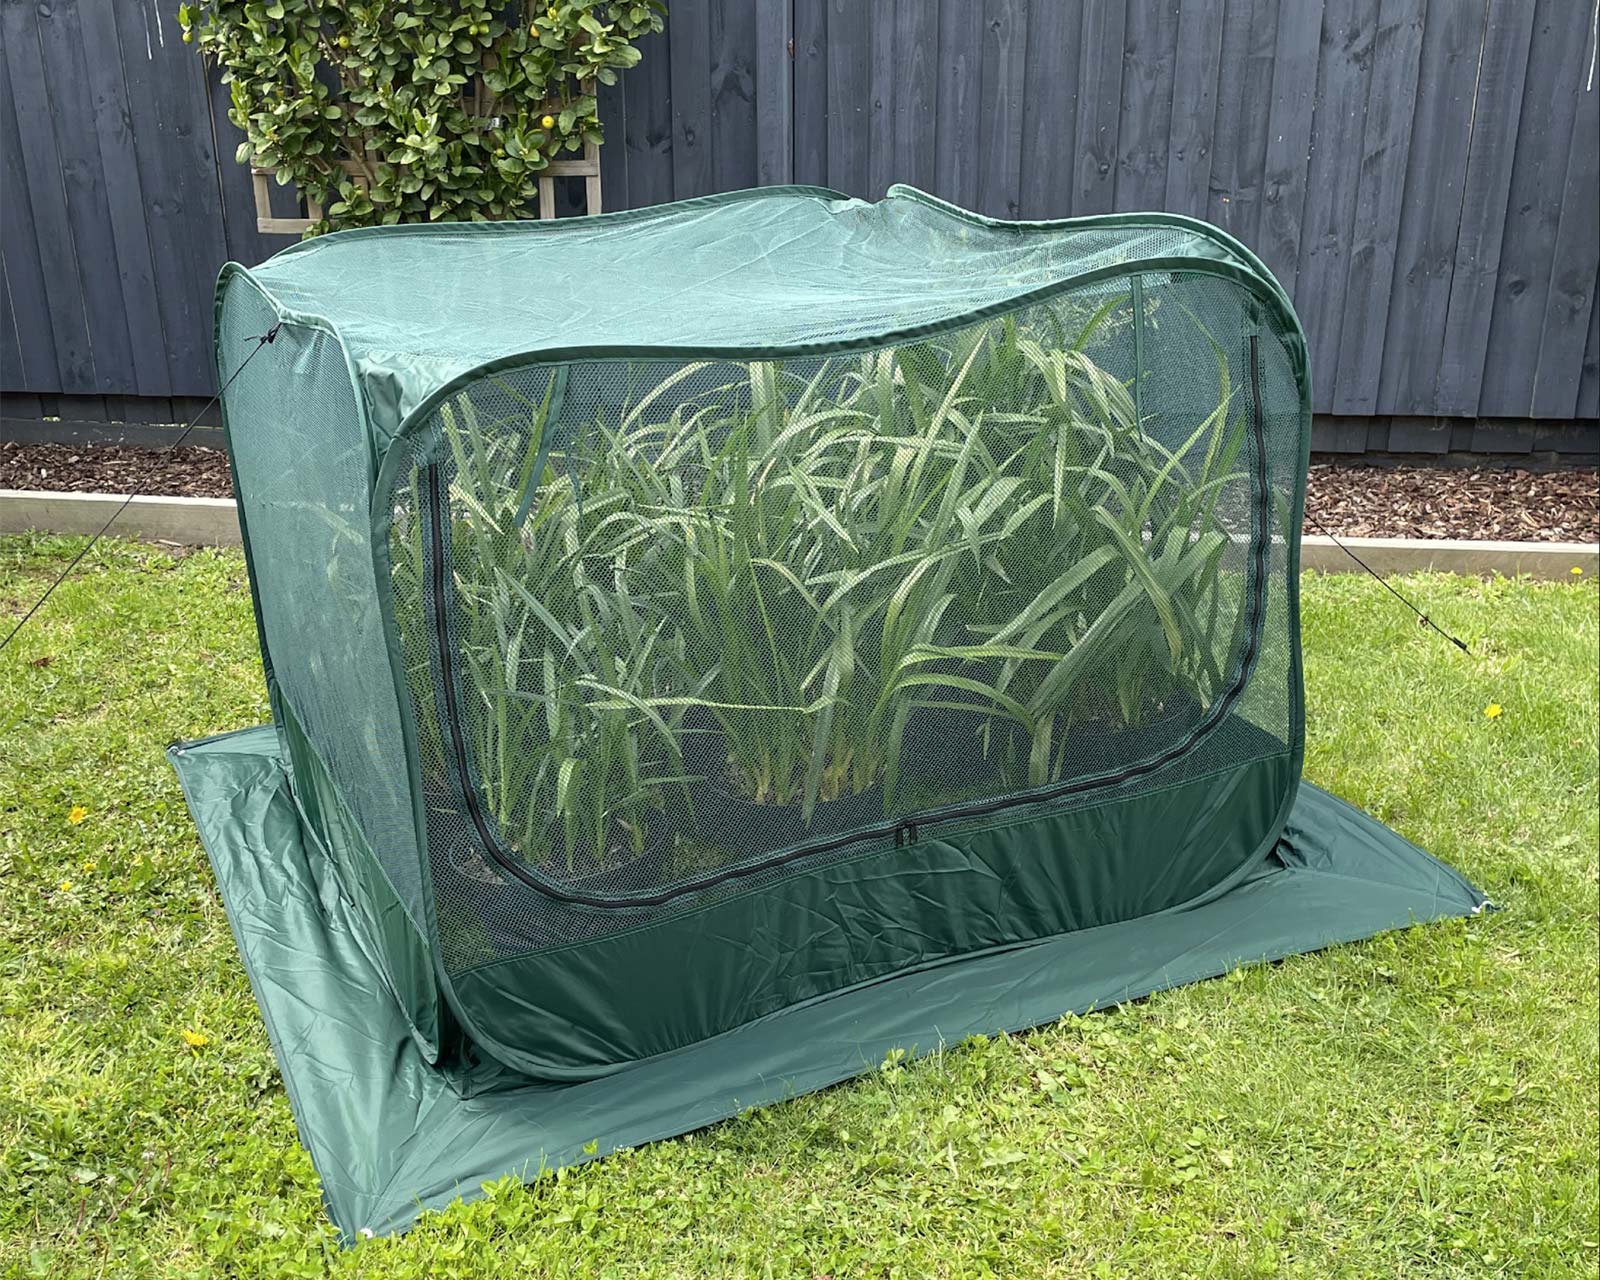 Net Plant pop-up cover - neat and easy way to protect your plants